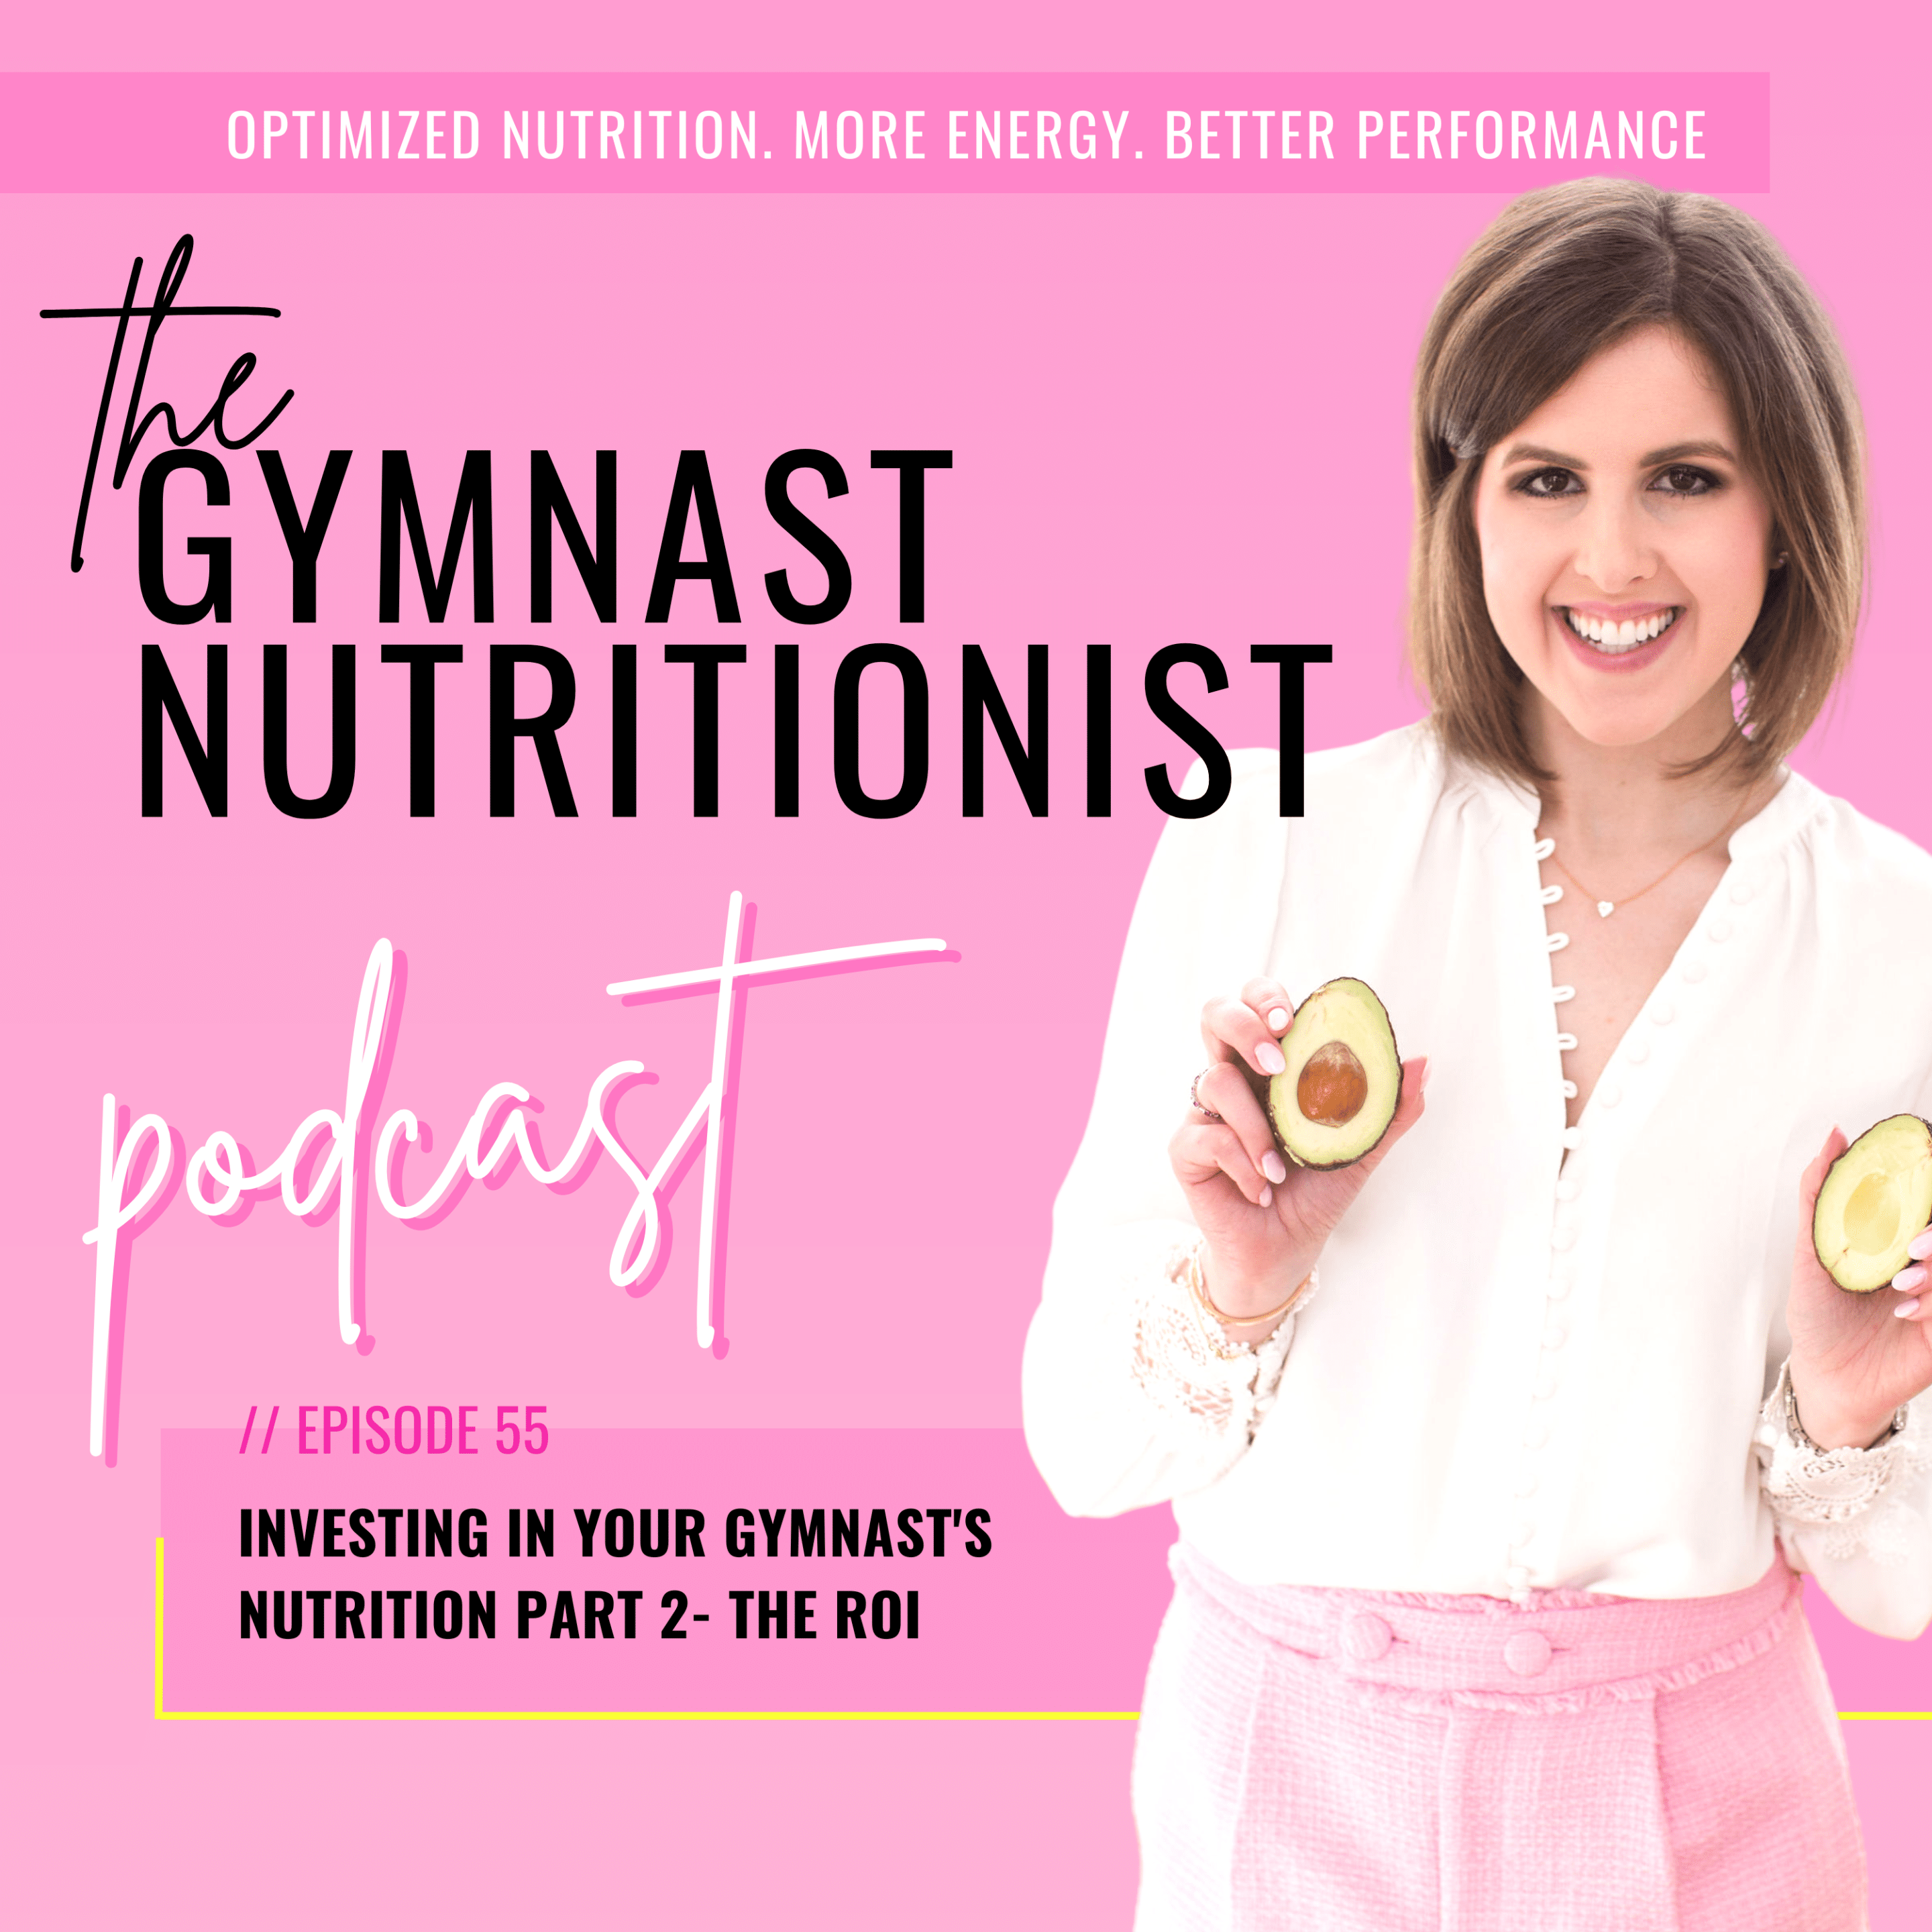 Episode 55: Investing in Your Gymnast's Nutrition Part 2- The ROI